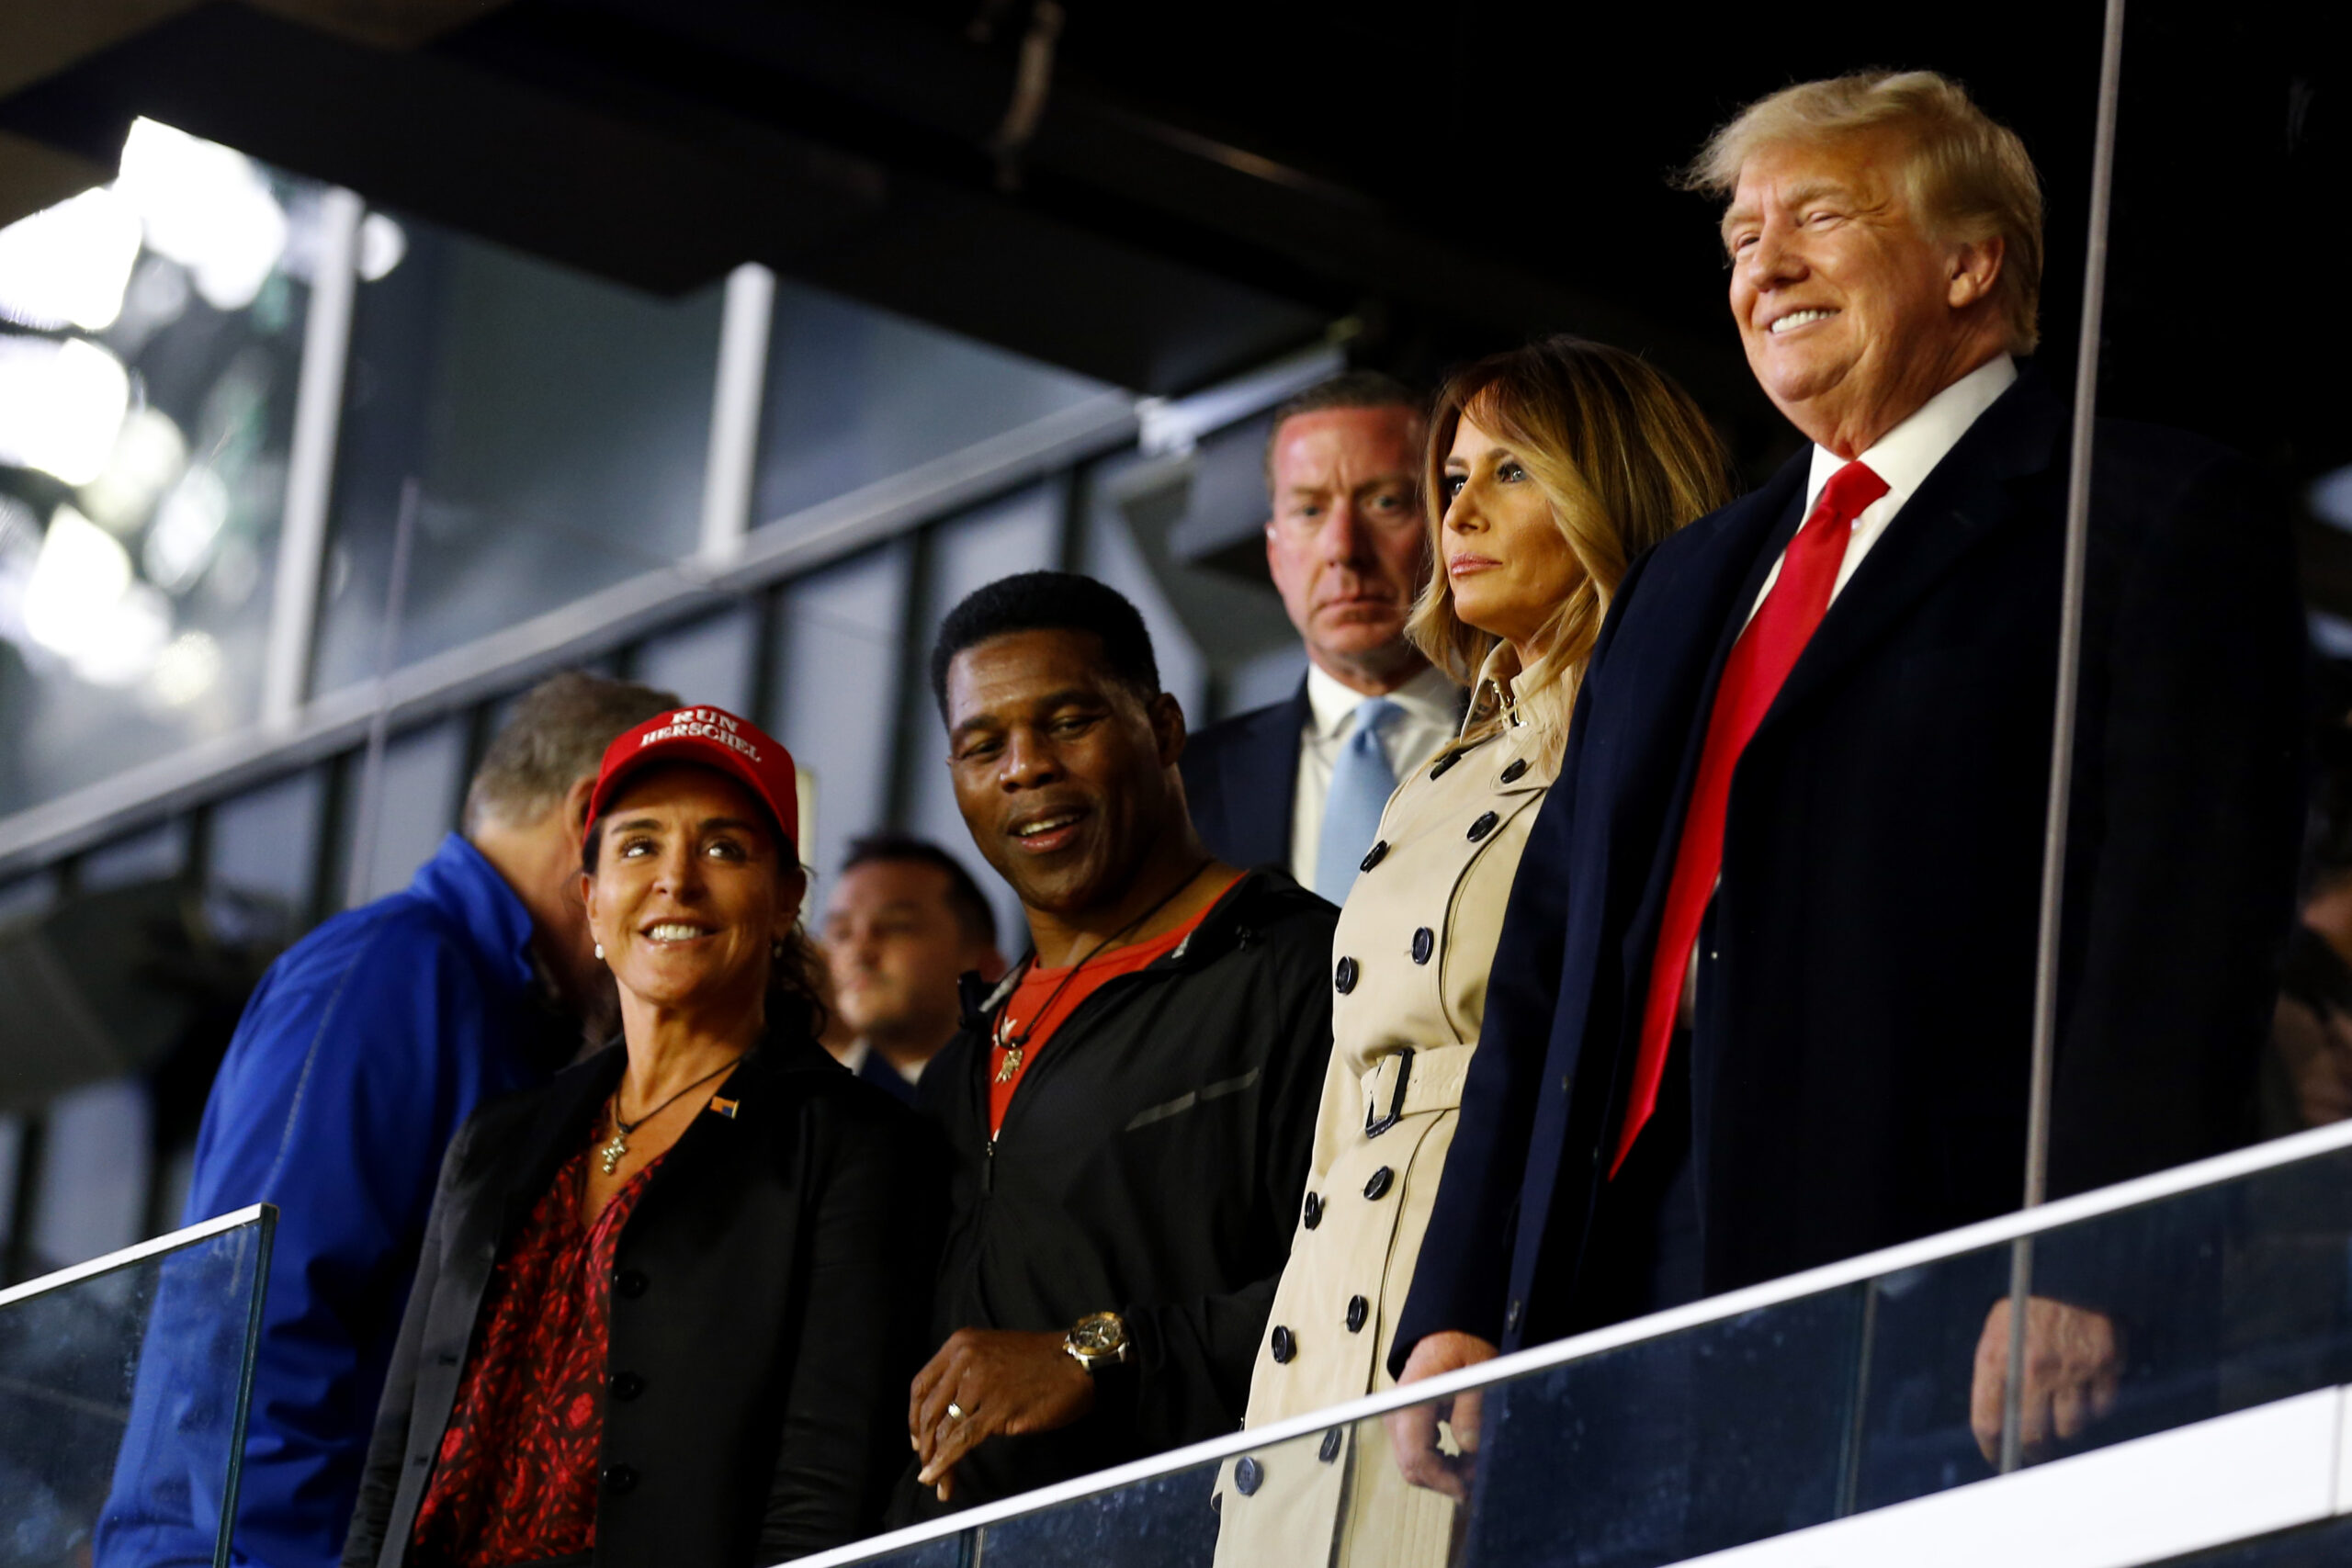 Herschel Walker, who entered the 2022 Senate race in Georgia with the support of Donald Trump, ended his failed campaign with more than $5 million in the bank.